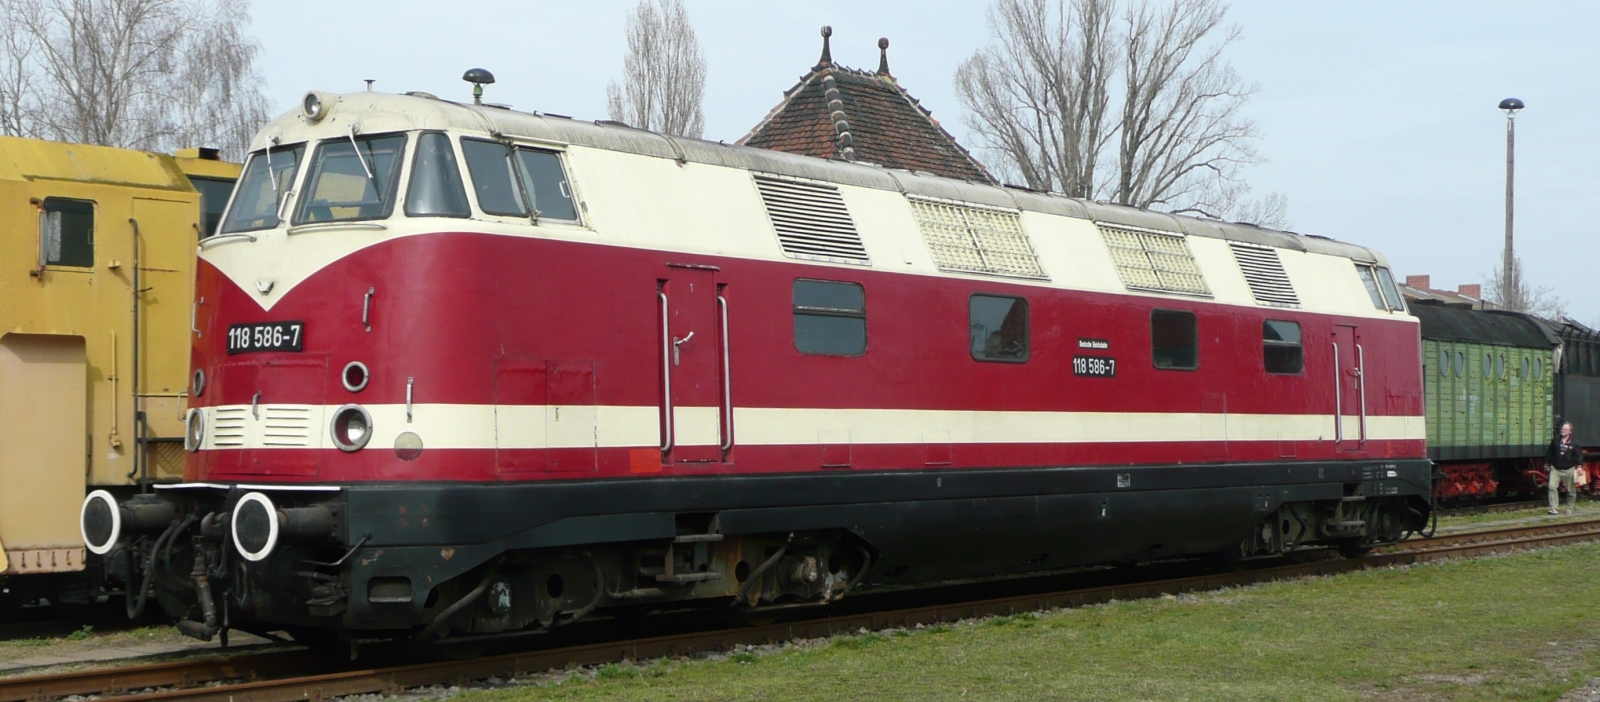 The preserved 118 586 in the original Reichsbahn livery in April 2016 in the traditional depot Stassfurt